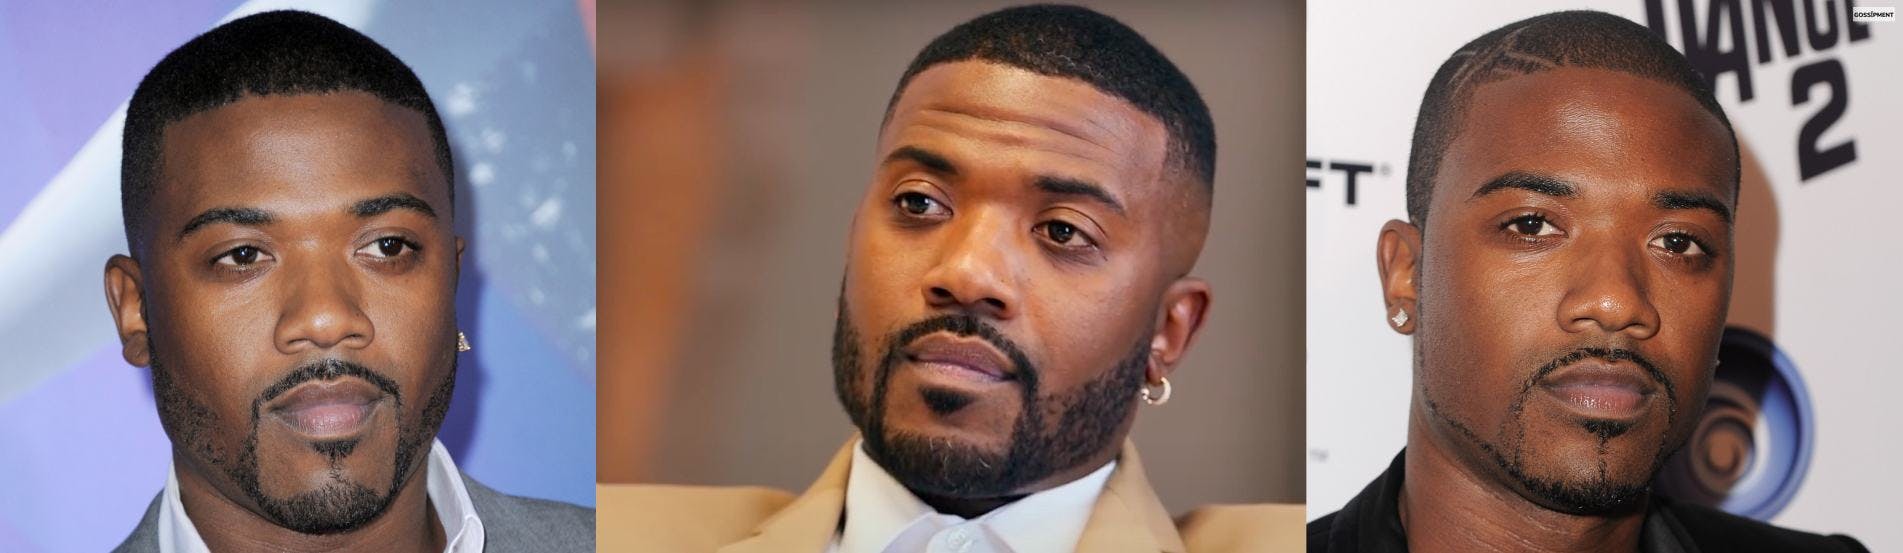 Cover Image for Ray J Net Worth: Wiki, Married, Family, Wedding, Income